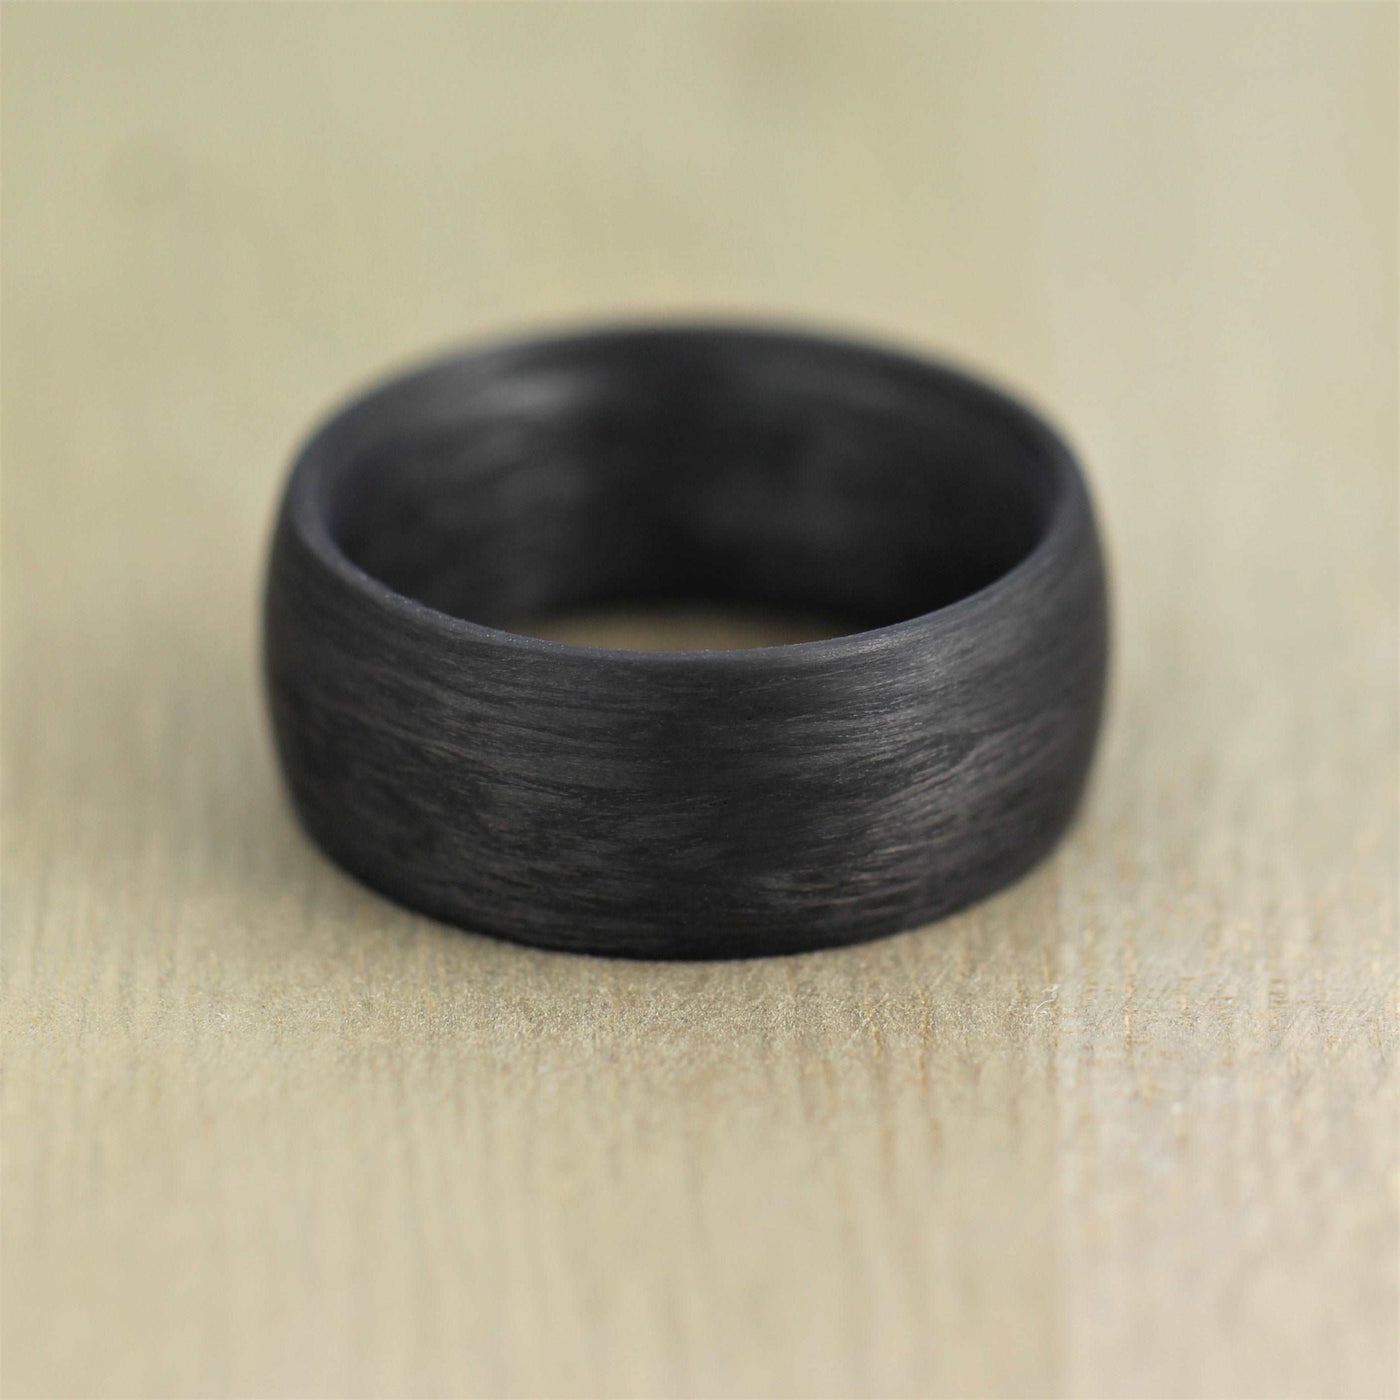 Wide Carbon Fibre, Domed Ring, Comfort fit & FREE Engraving! (10 to 12mm)